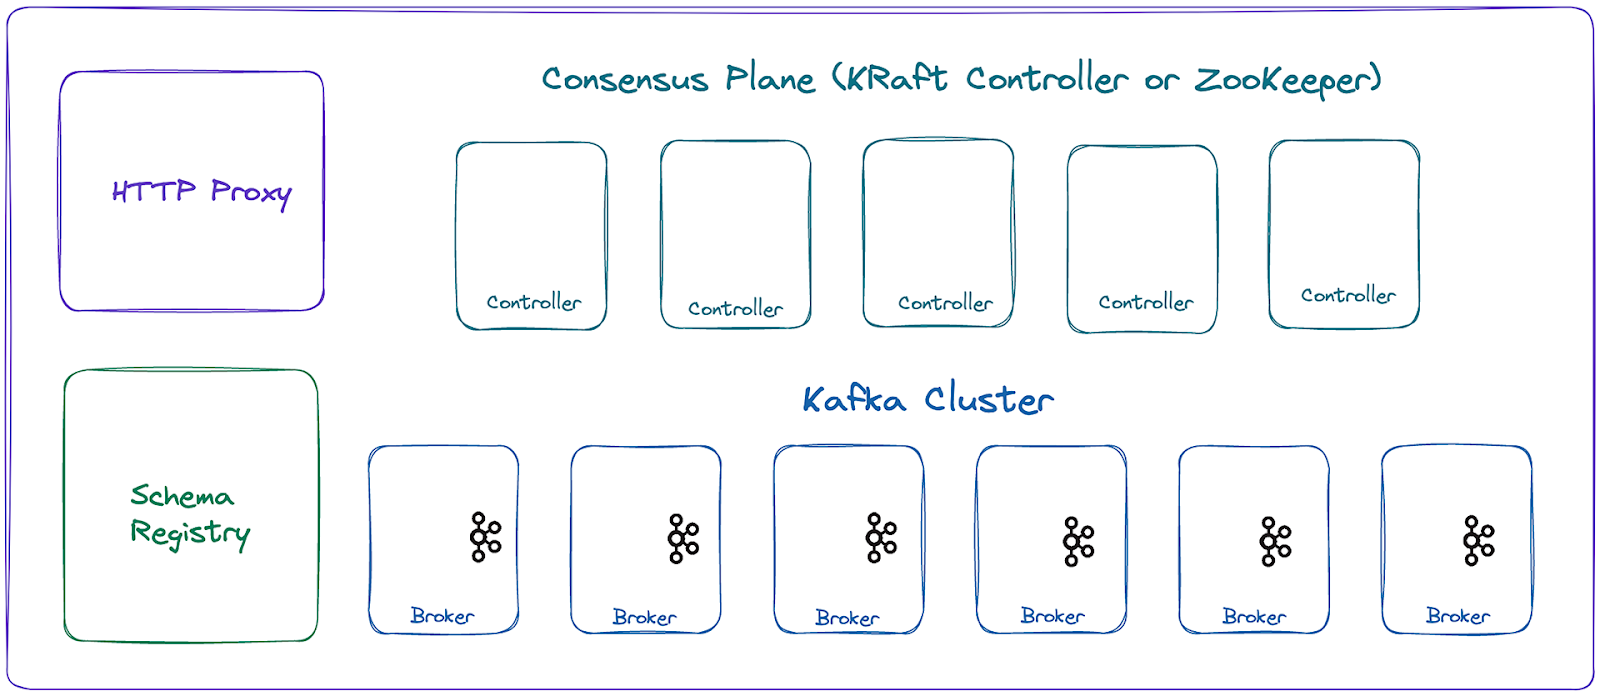 Running Kafka at scale comes with a lot of operational complexity